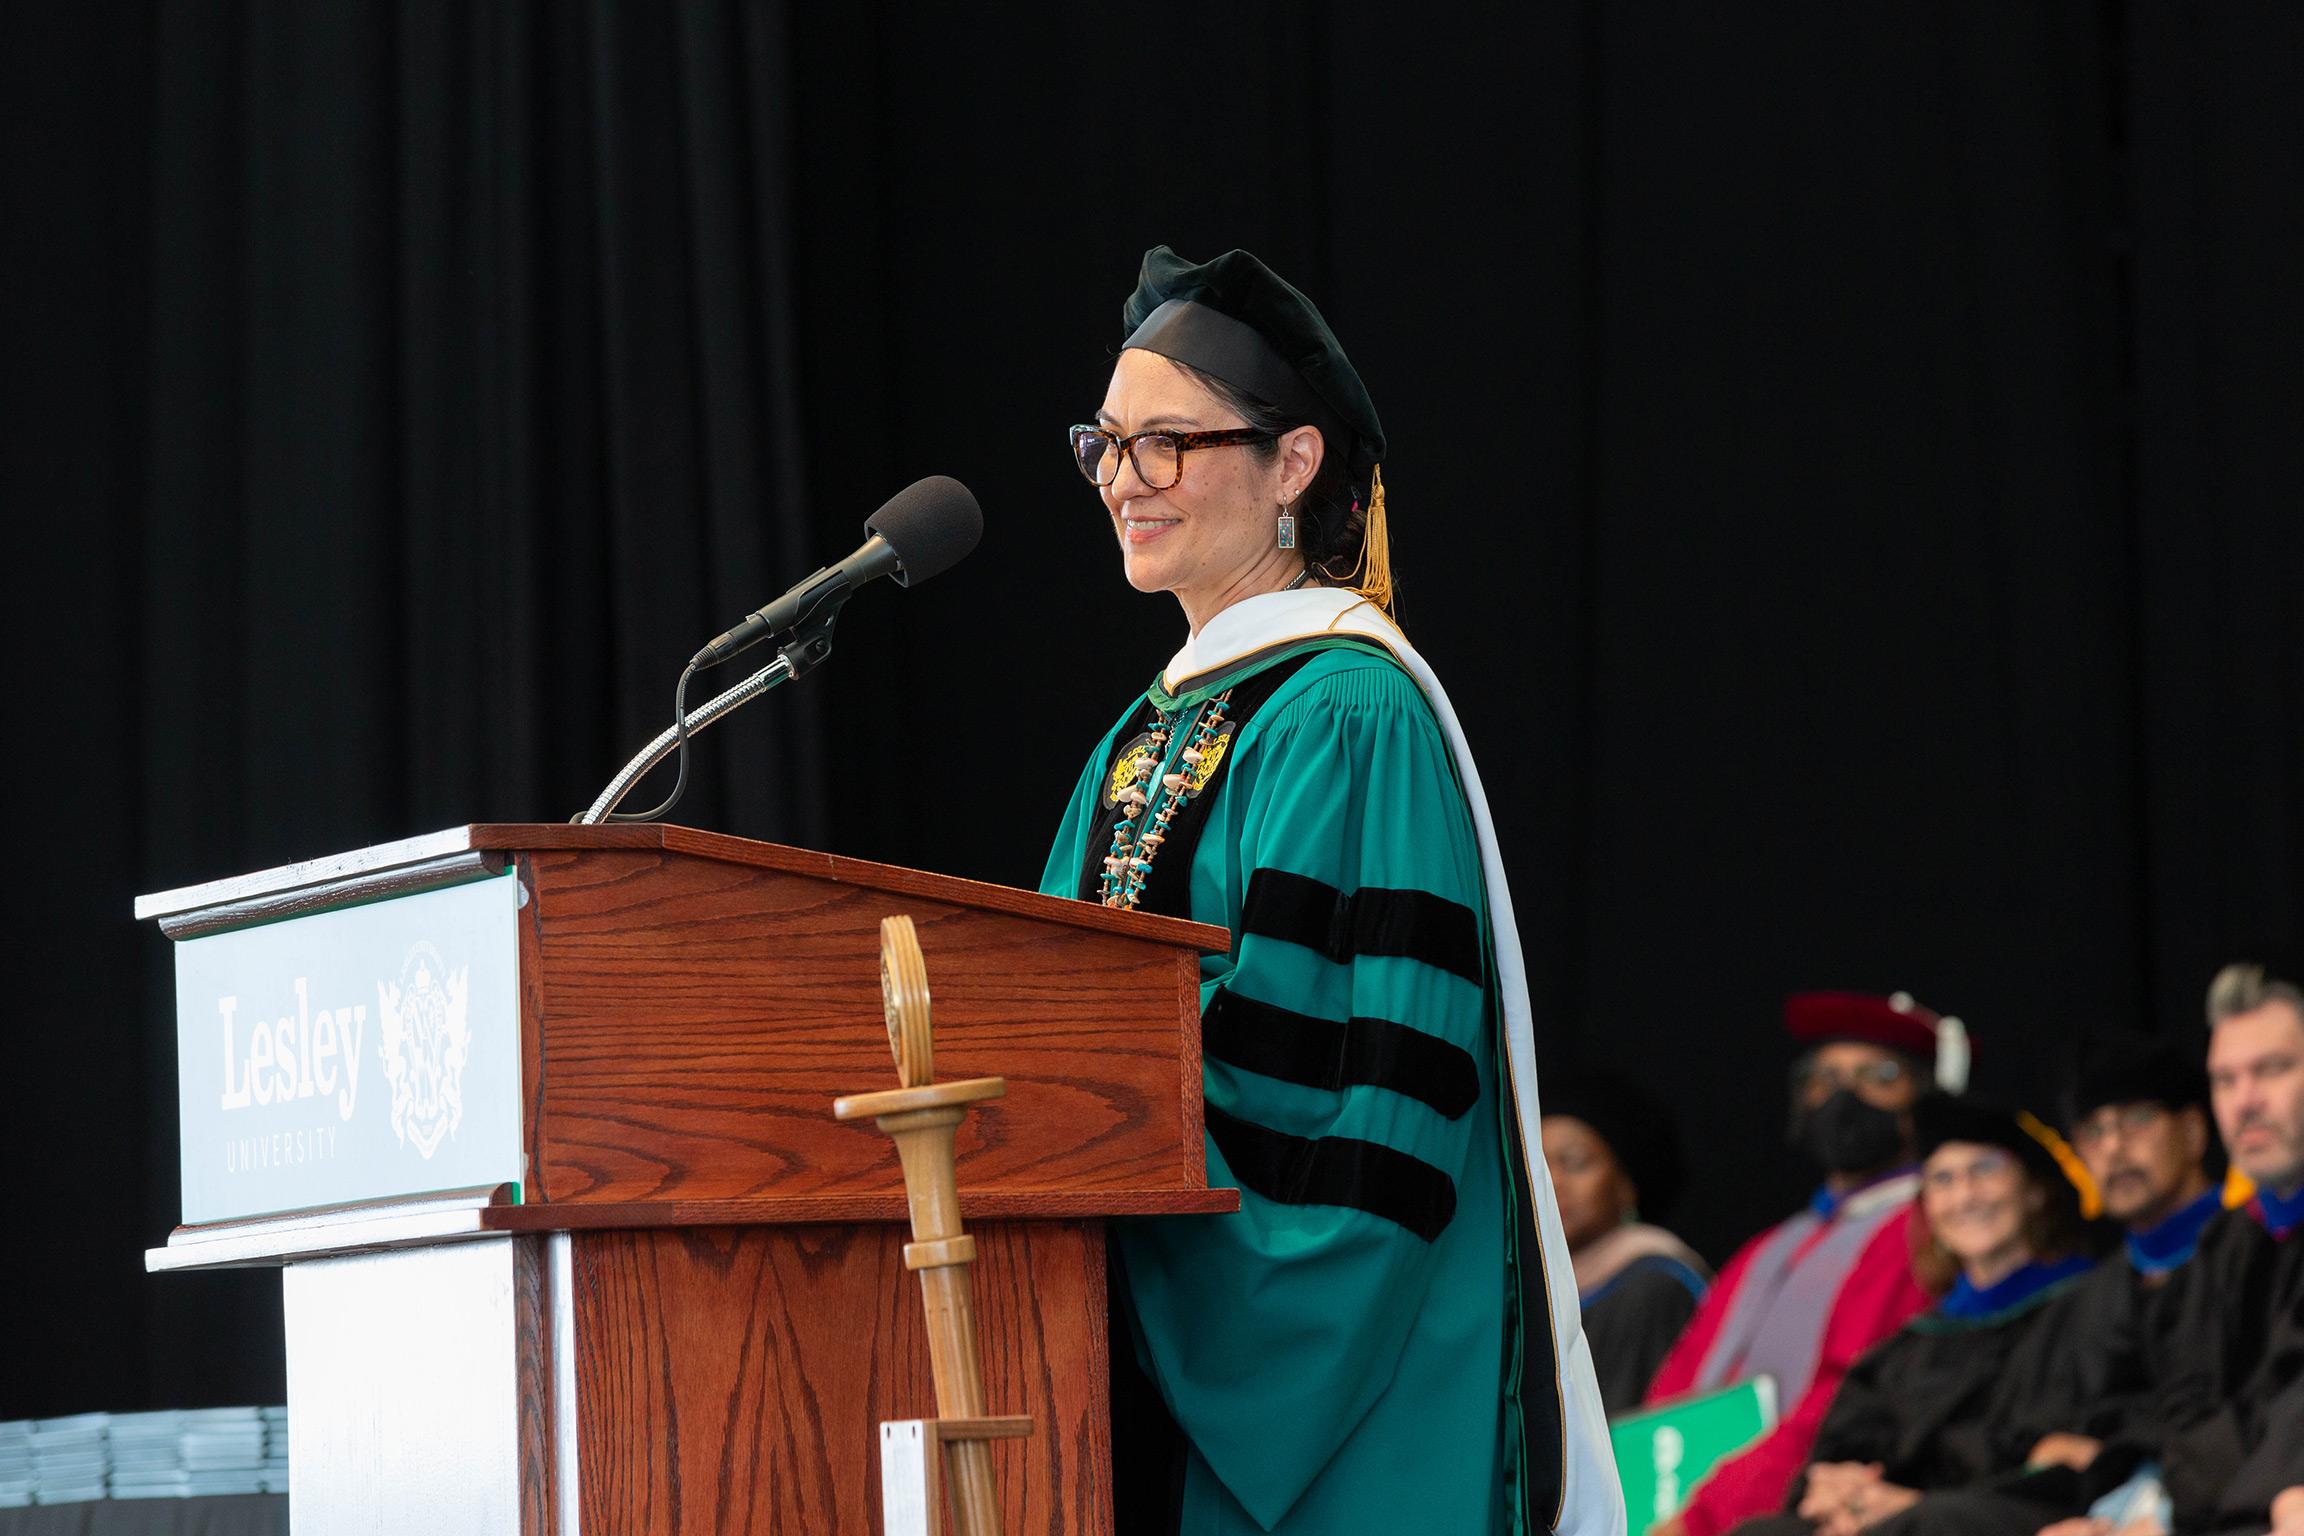 Chair Shelly C. Lowe Delivers the Lesley University Commencement